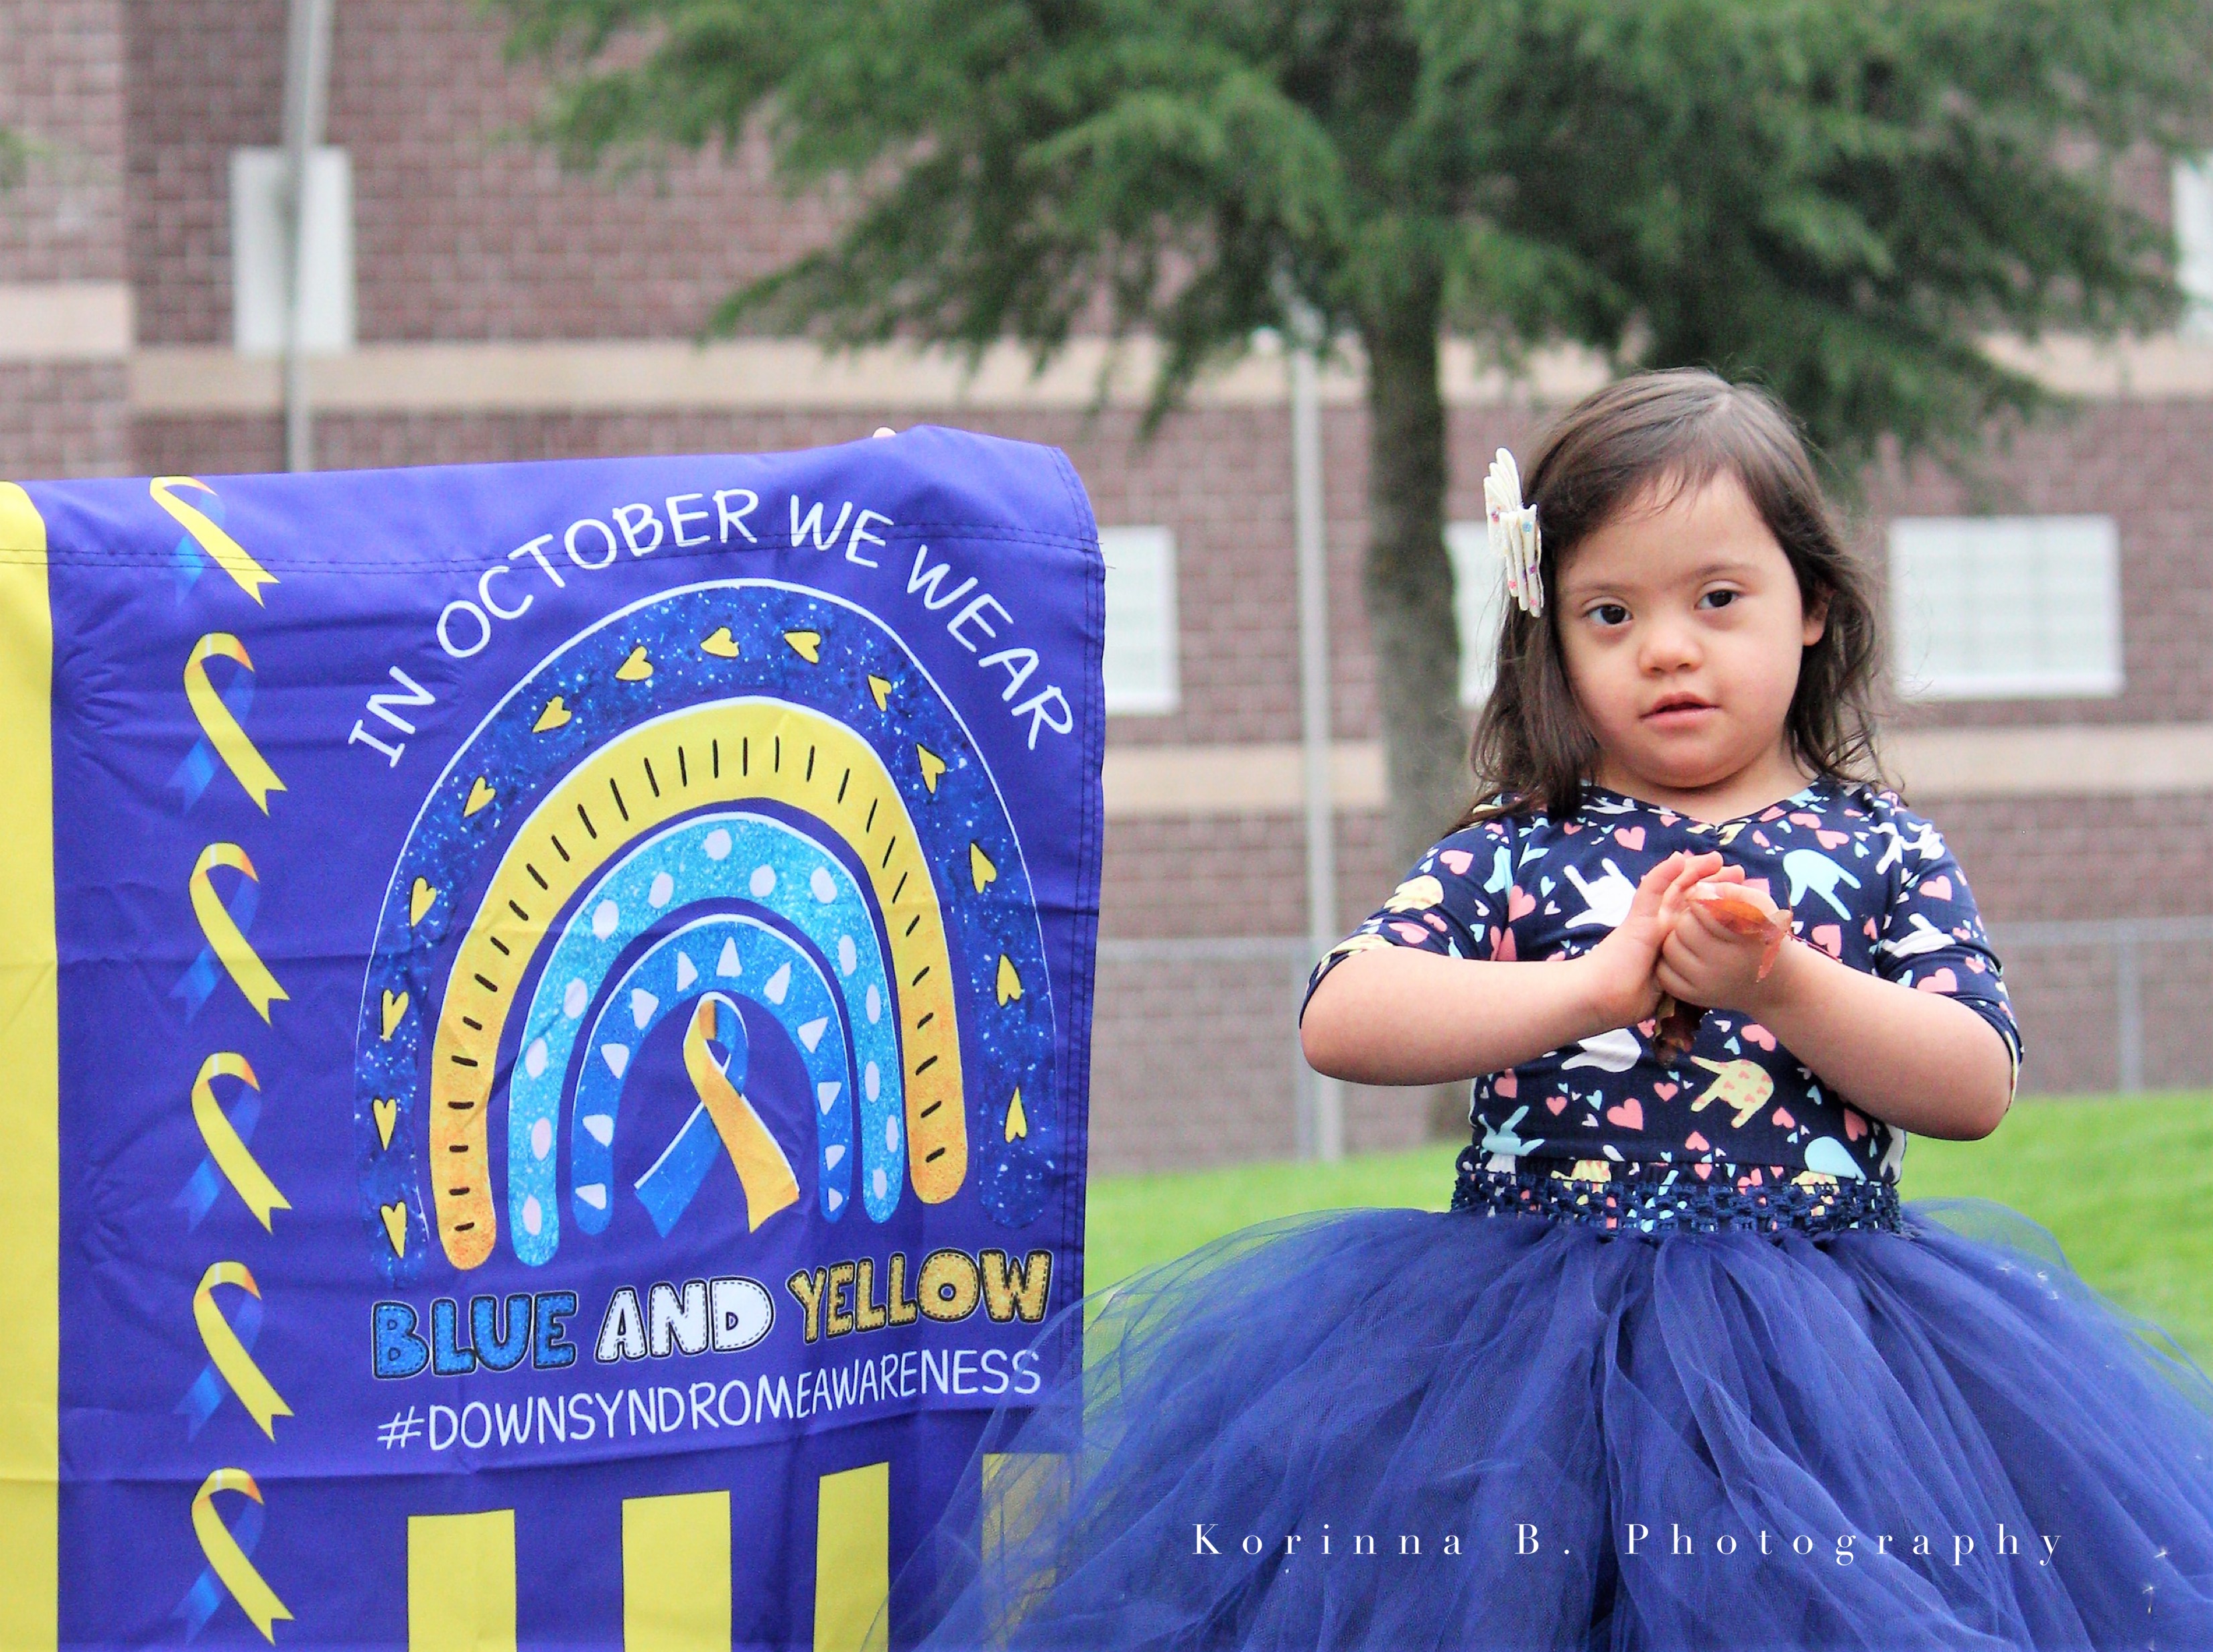 Arianna Graham standing in front of Blue and Yellow sign